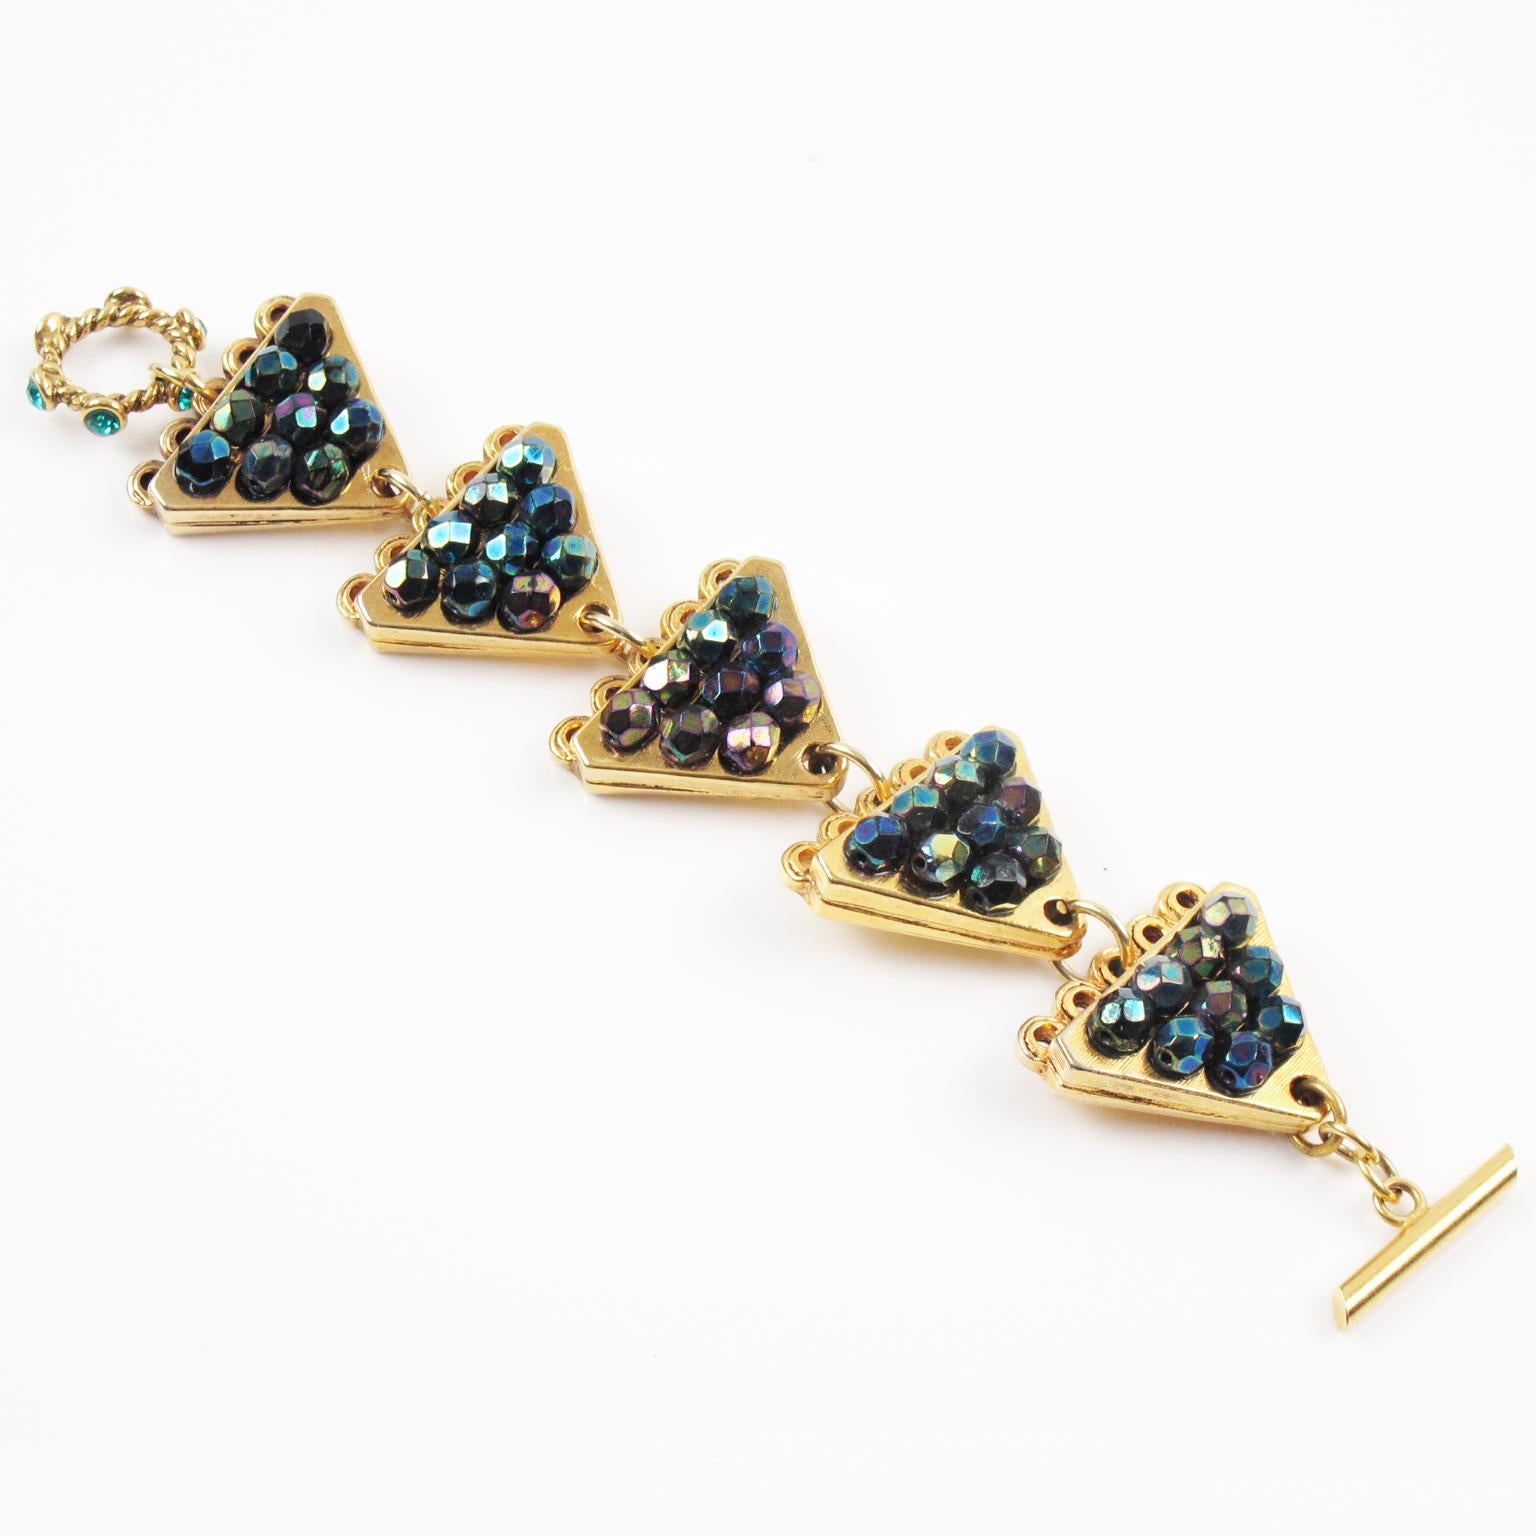 This lovely Claire Deve Paris signed link bracelet features a geometric shape with triangle gilt metal elements paved with faceted crystal beads in assorted purple and green iridescent colors. There is a jeweled toggle closing clasp with turquoise